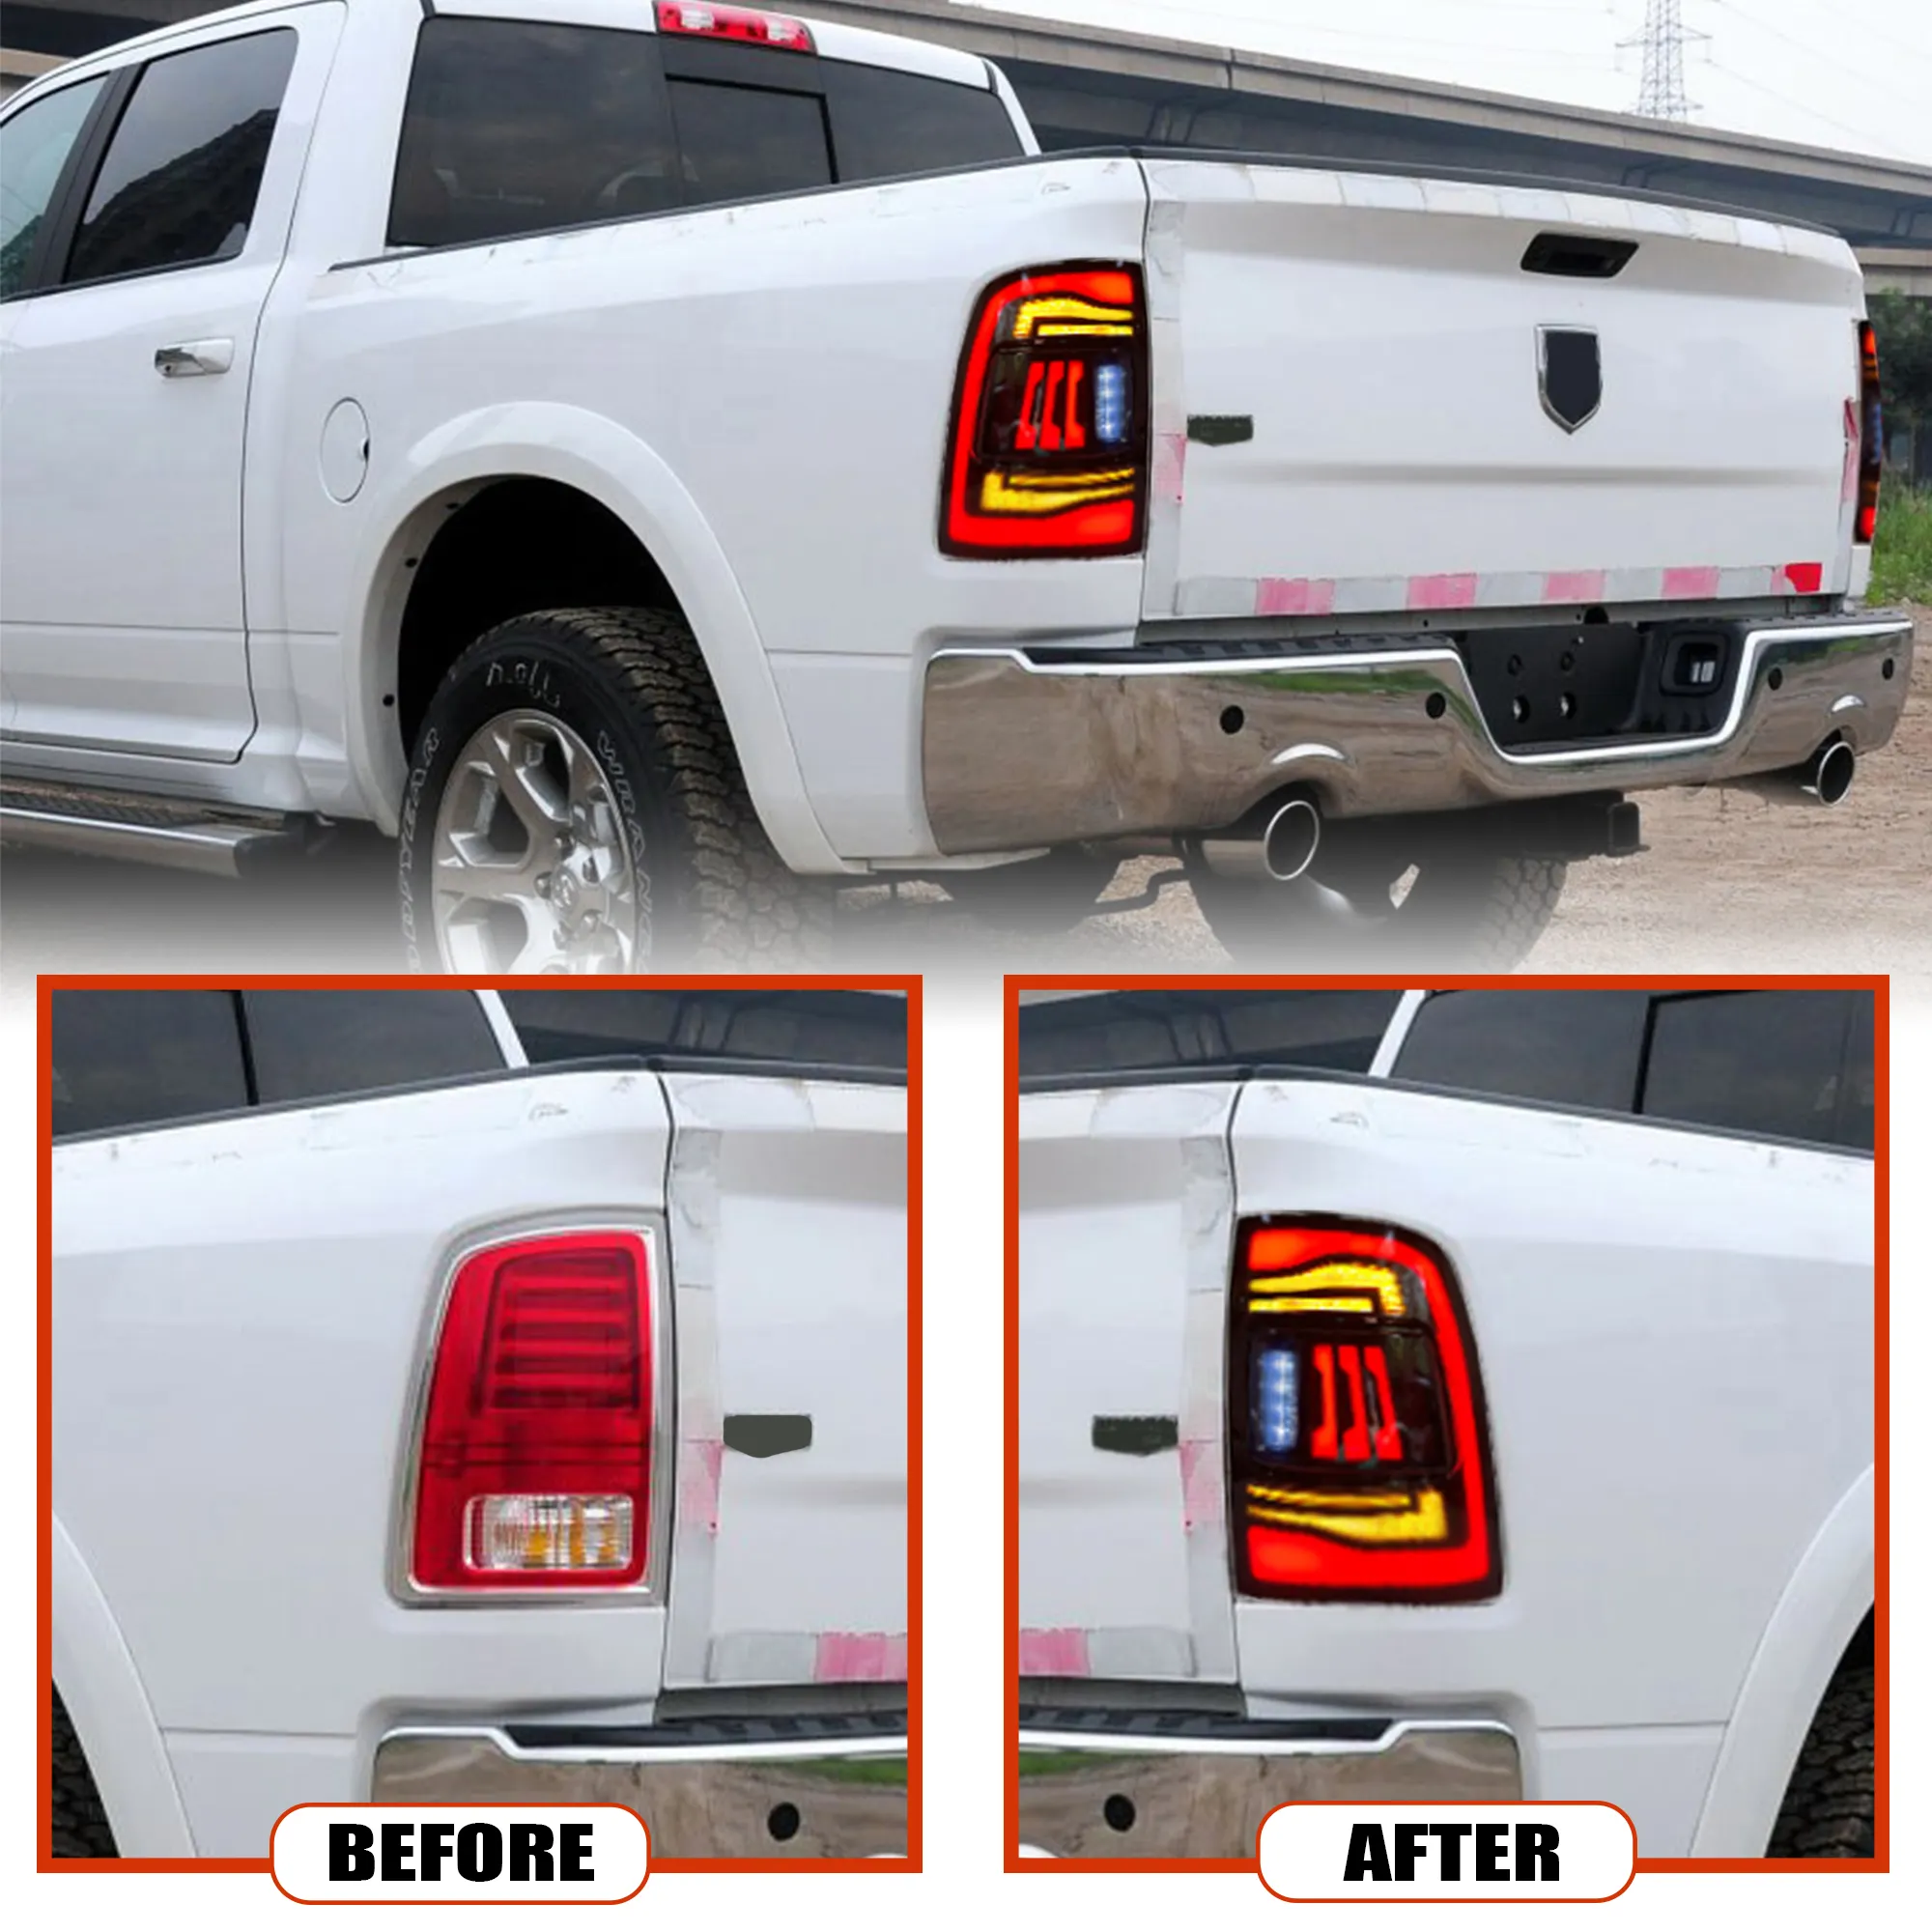 Pick-up Truck Lamp For Dodge Ram 1500 2500 3500 2009-2018 Car Led Tail Light Back Rear Lamp Auto Accessory